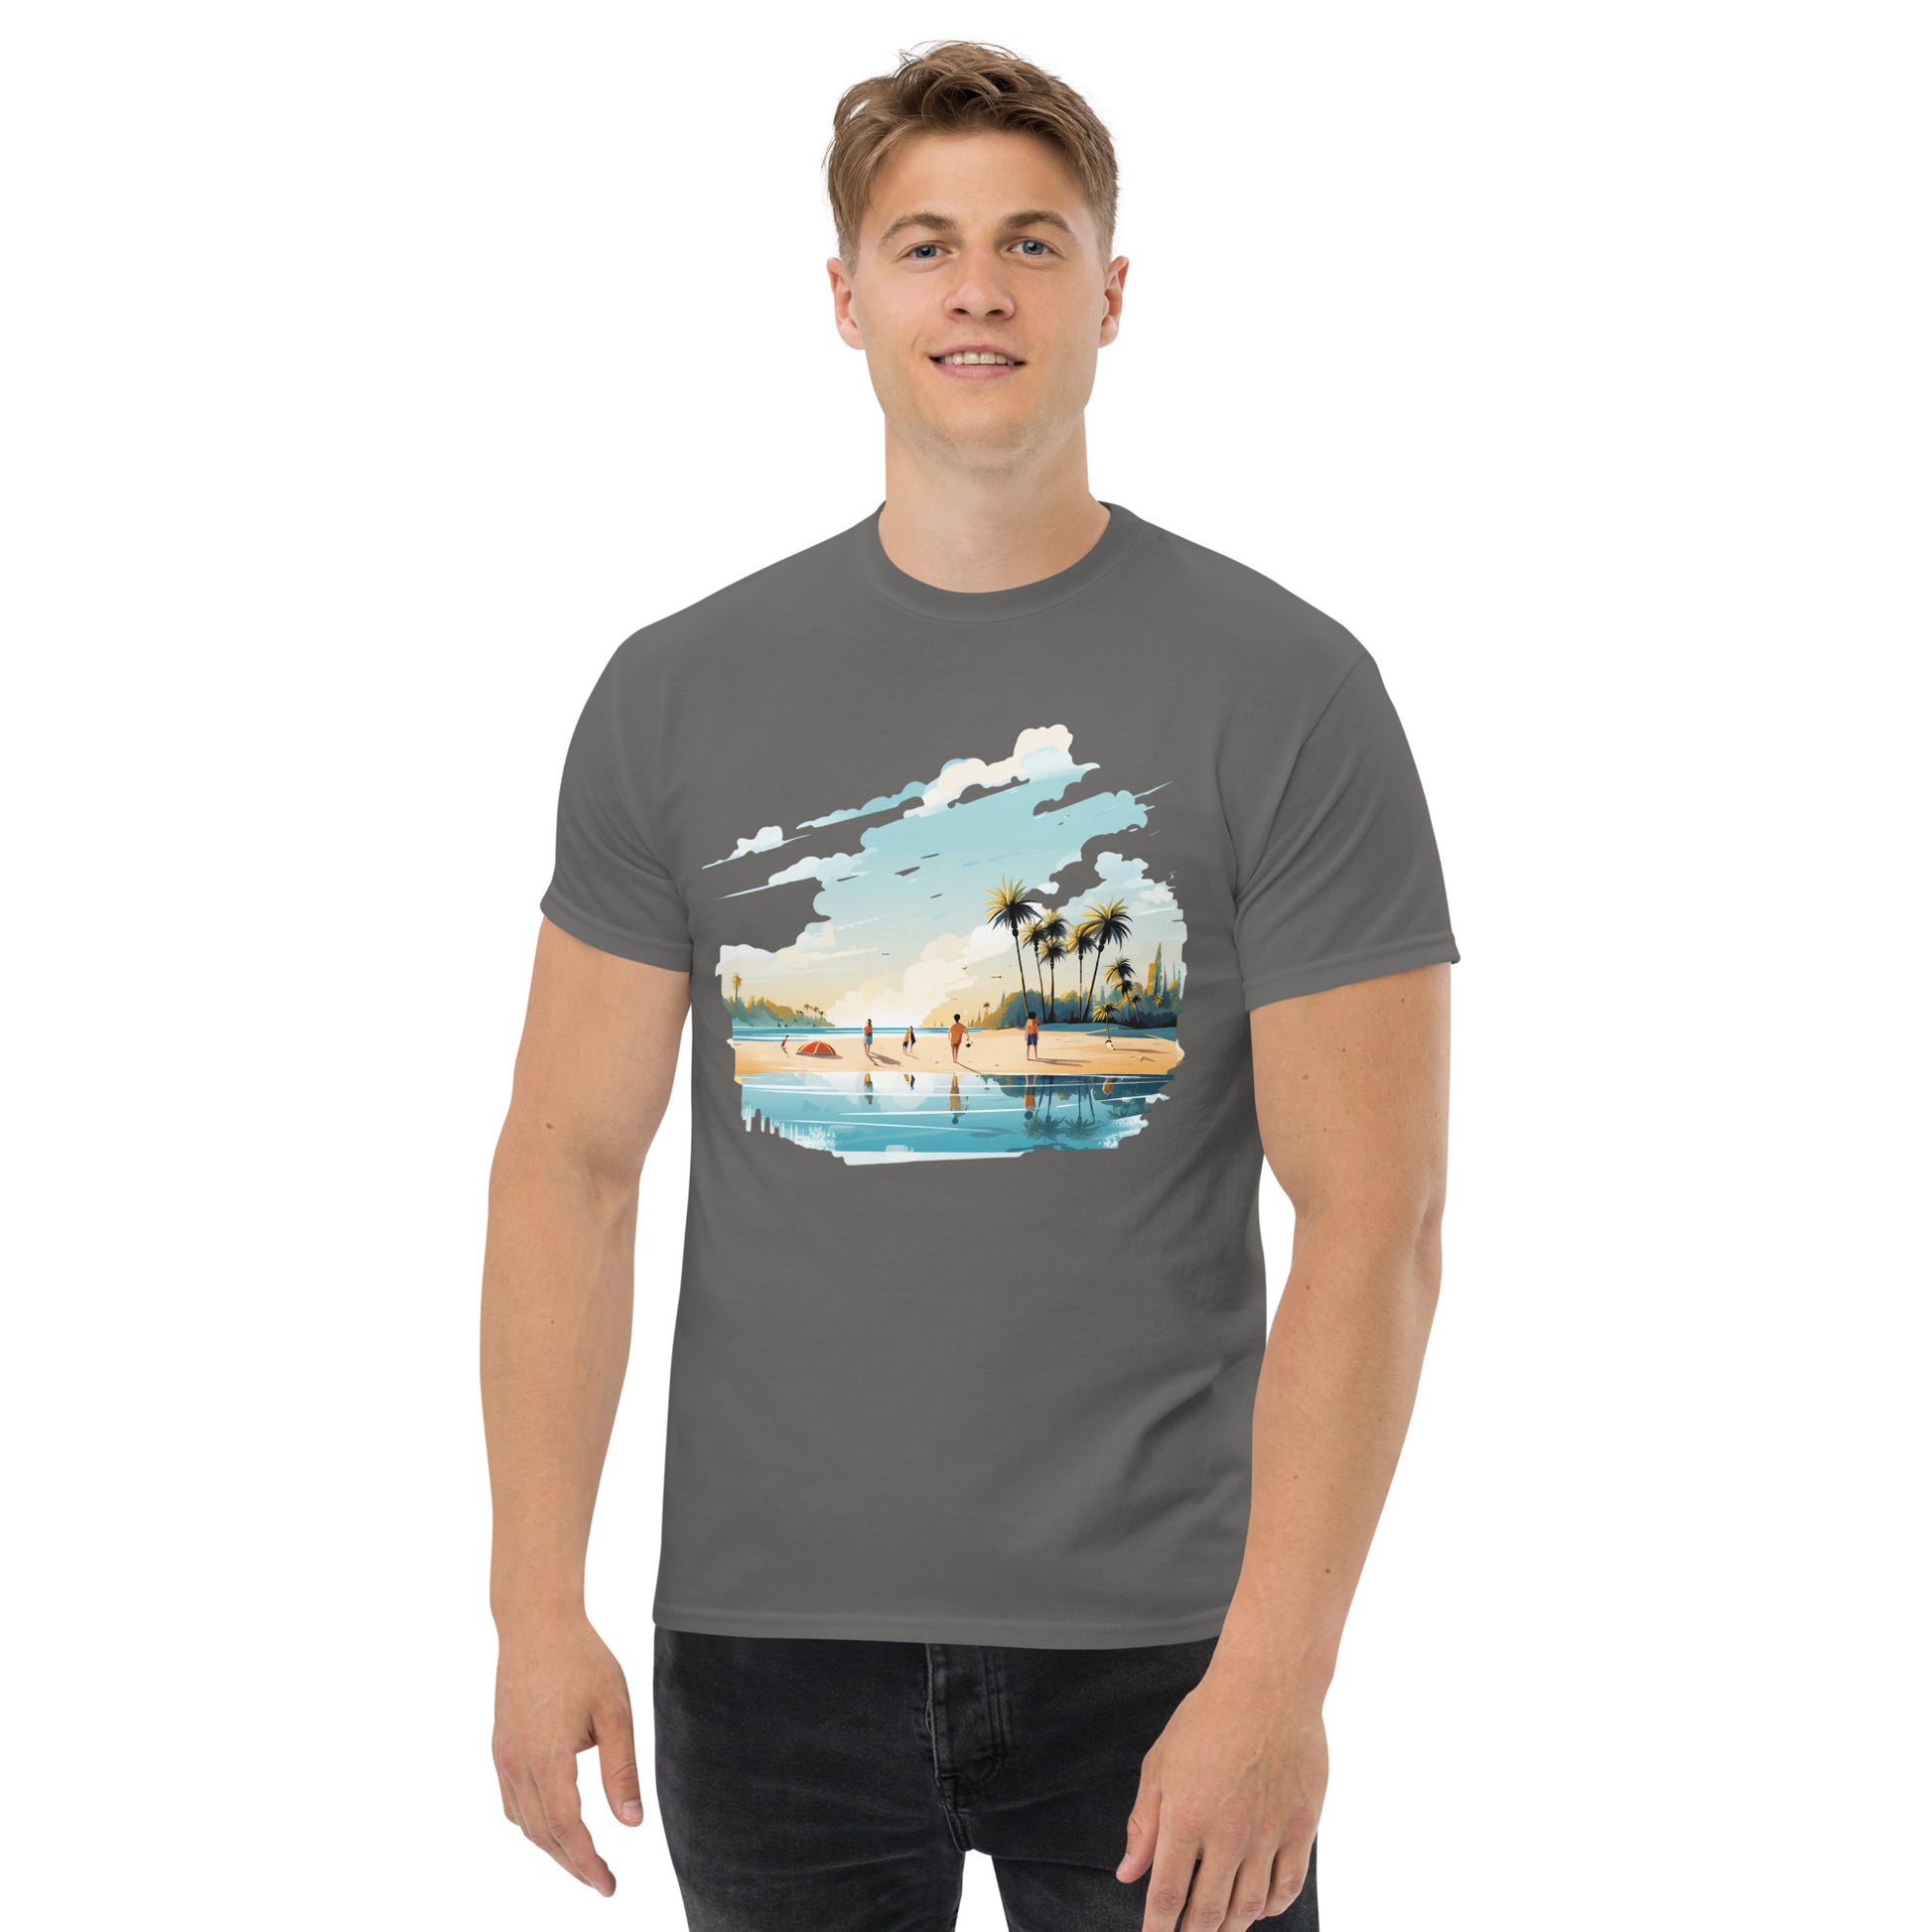 Men with charcoal T-shirt and a picture of a island with sea and sand